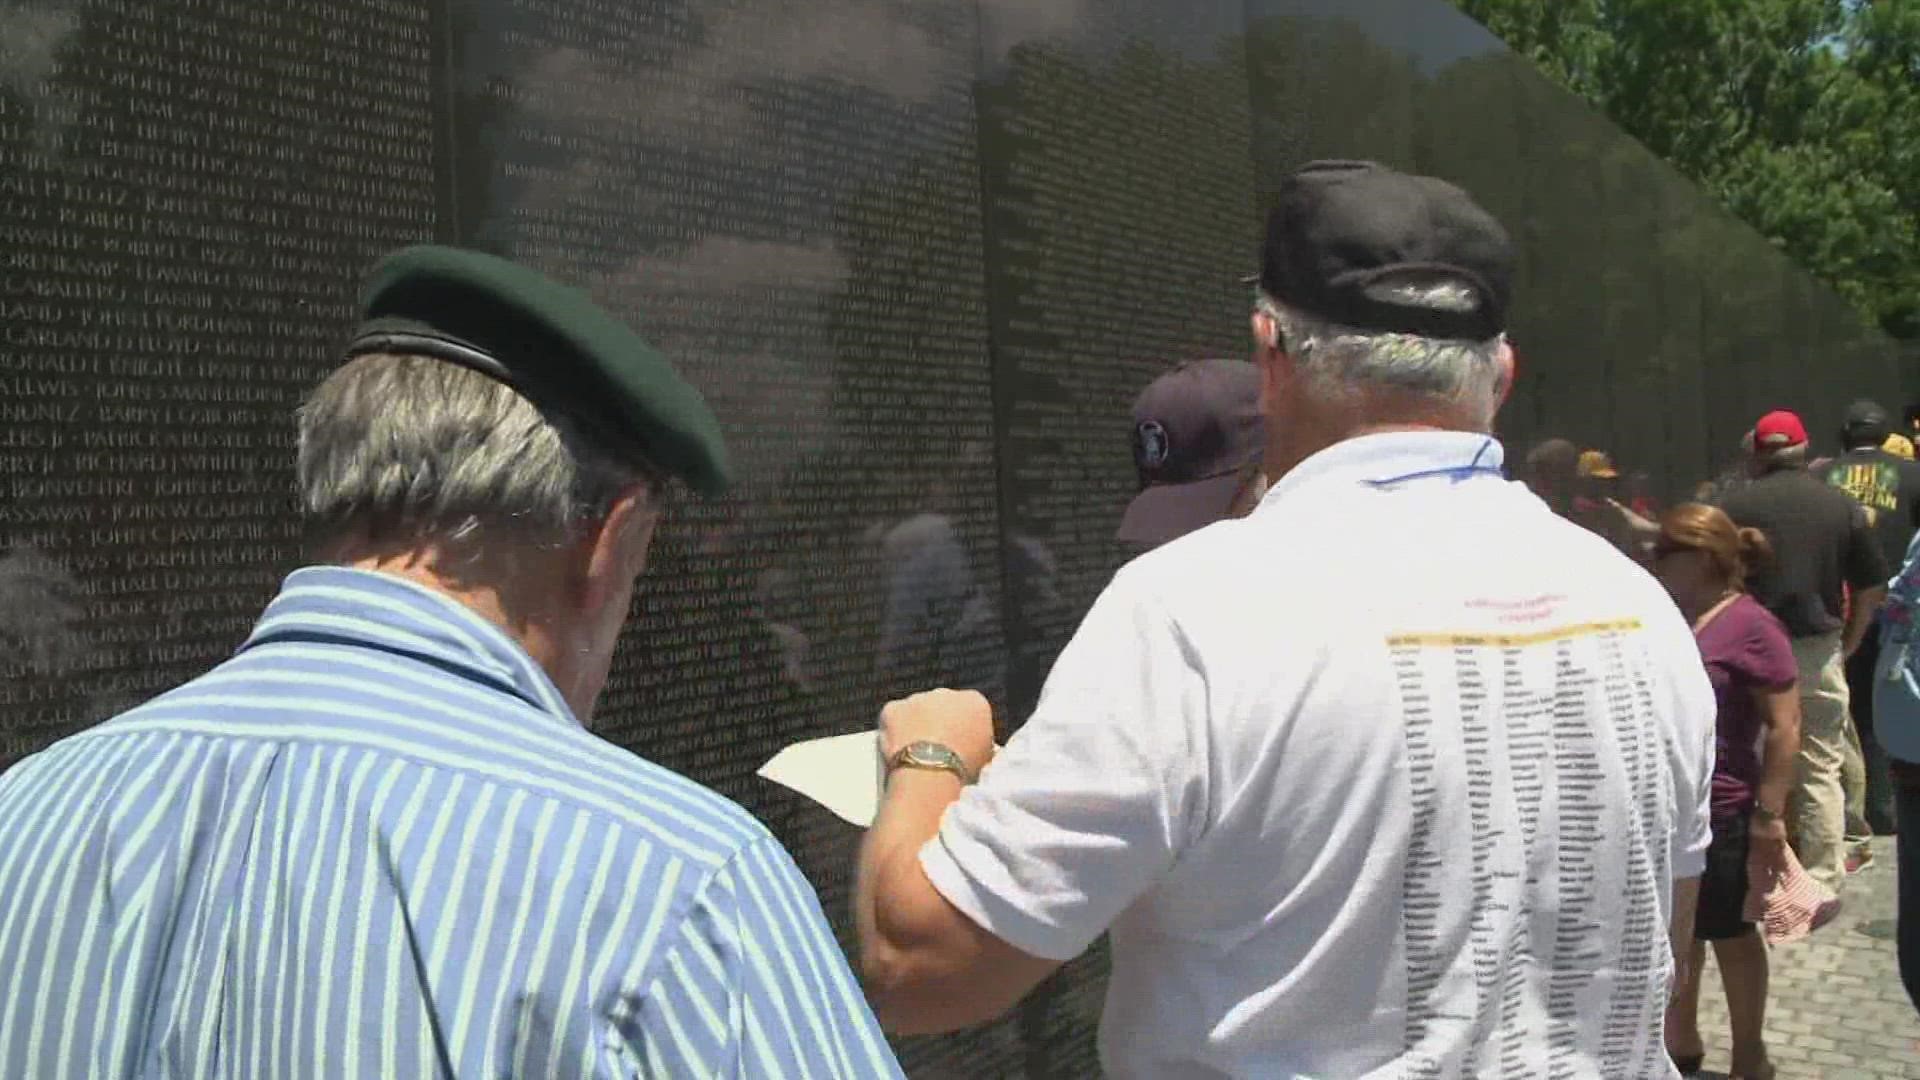 HonorAir Knoxville takes veterans to Washington, D.C. completely for free.